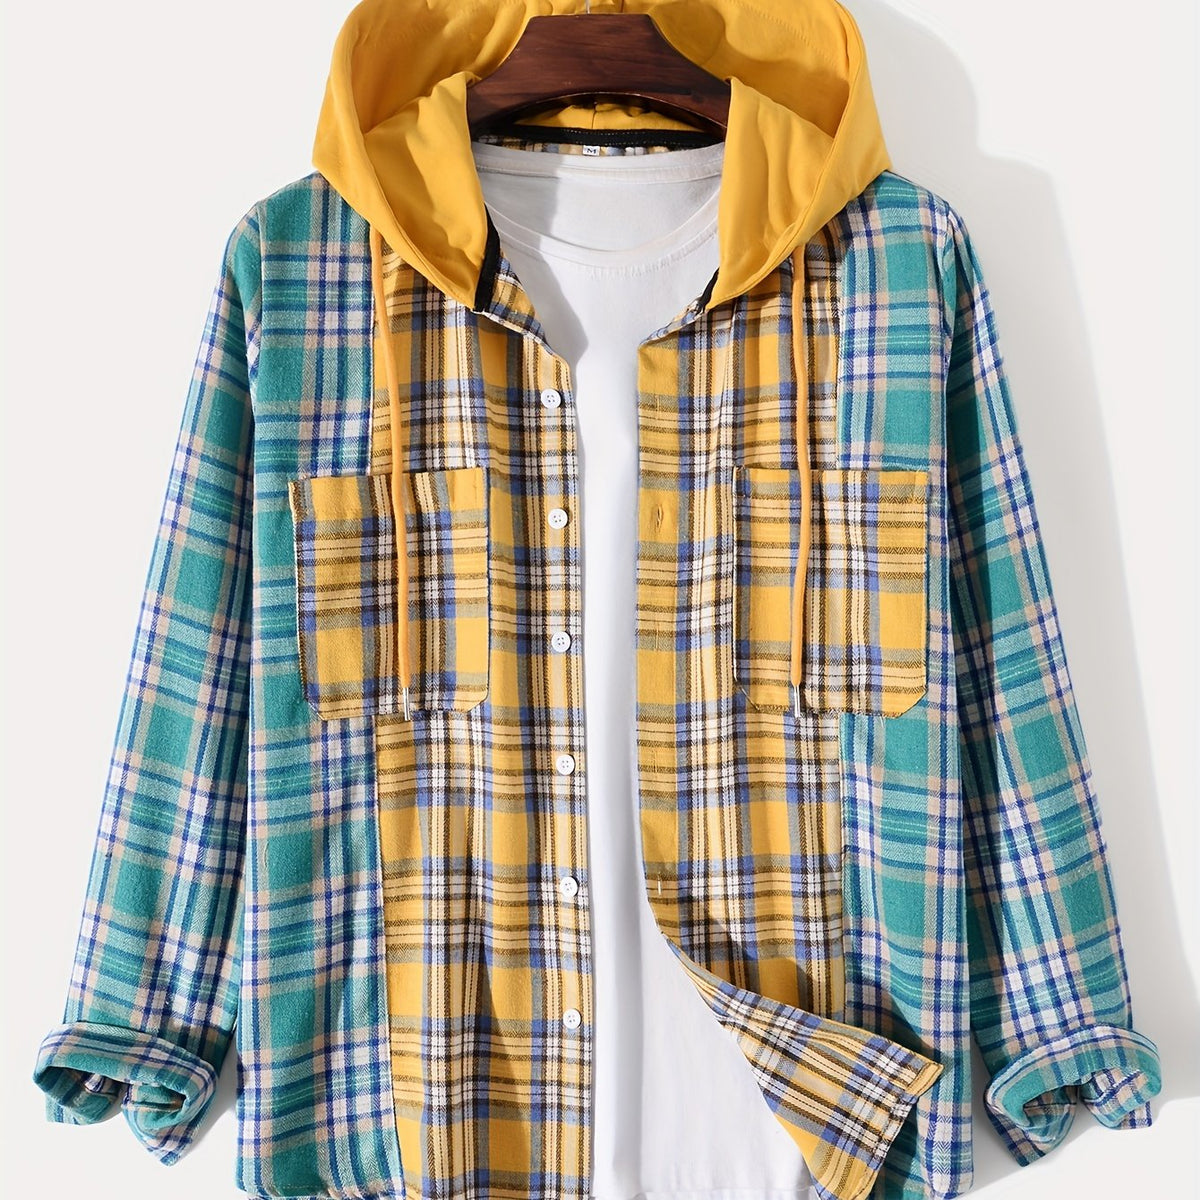 vlovelaw  vlovelaw  Fashionable And Versatile Men's College Style Casual Plaid Contrast Colors Hoodies Button Drawstring Shirt Jacket, Suitable For Outdoor